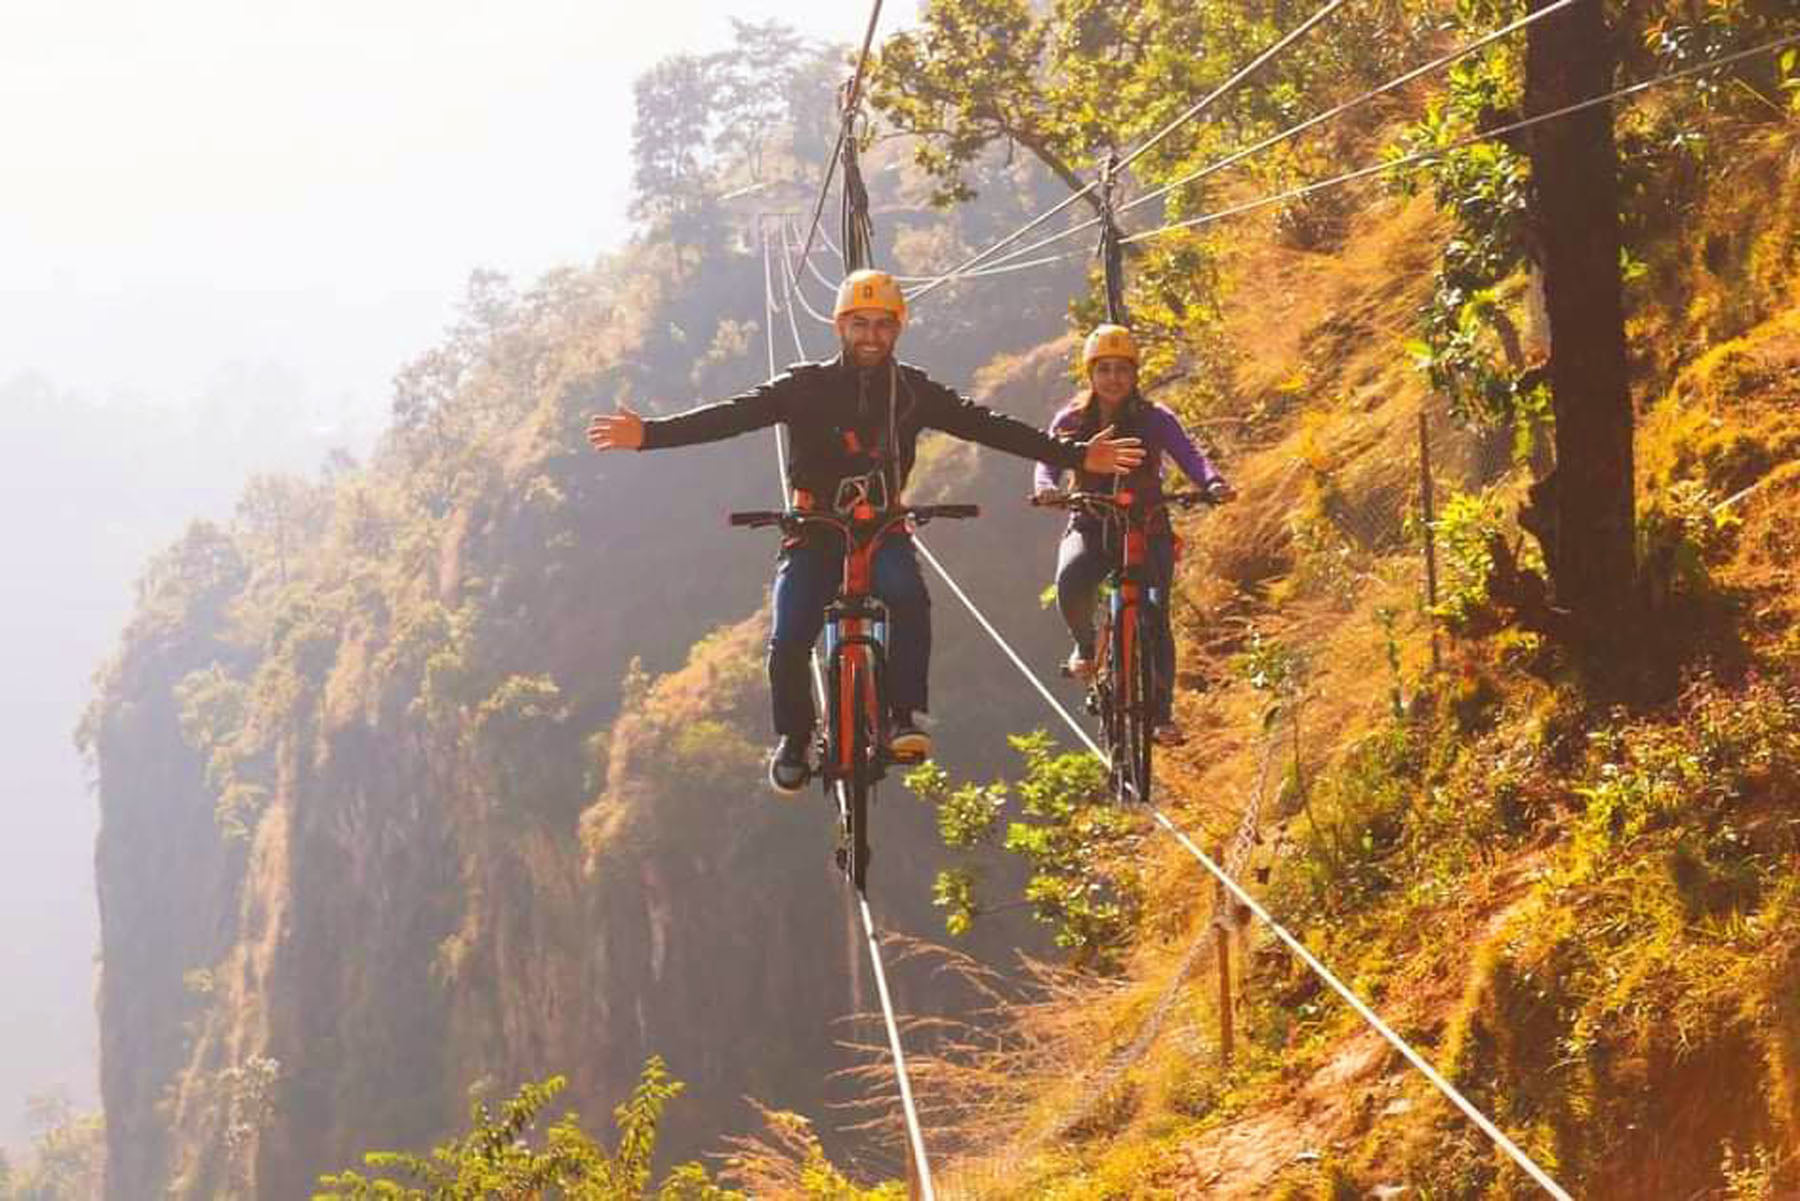 World’s tallest and longest Sky Cycling begins in The Cliff, Kusma